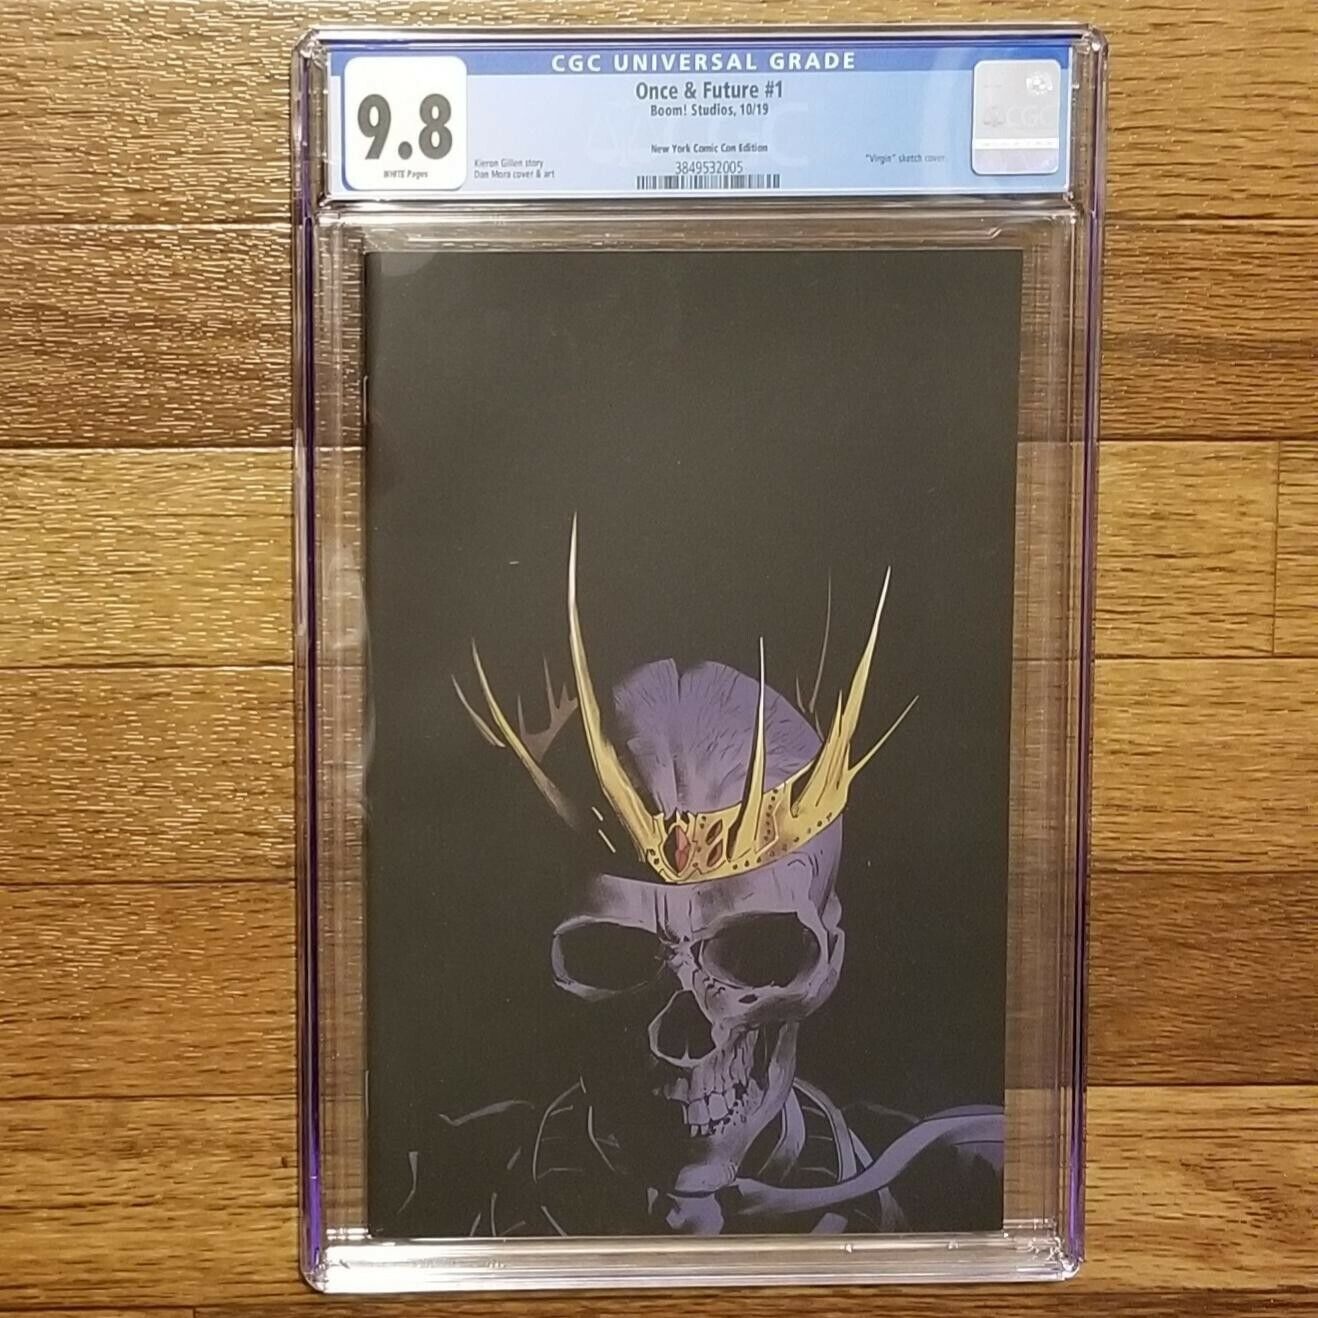 Once and & Future 1 NYCC Gold Crown CGC 9.8 - limited to only 250 copies